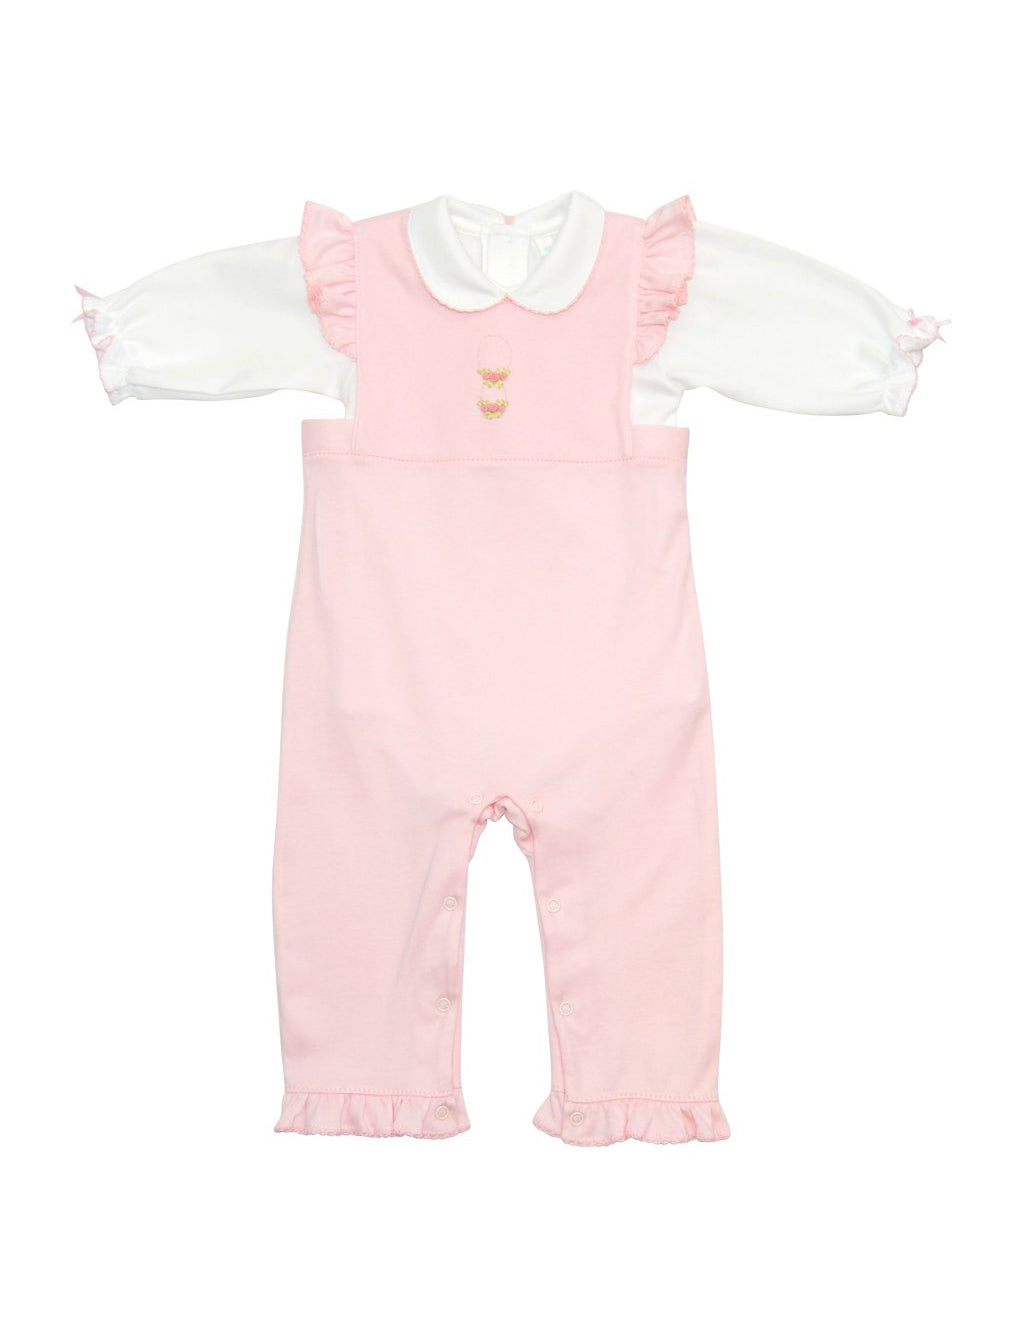 Baby Girl's Pink Overall Set With Tiny Posies - Little Threads Inc. Children's Clothing